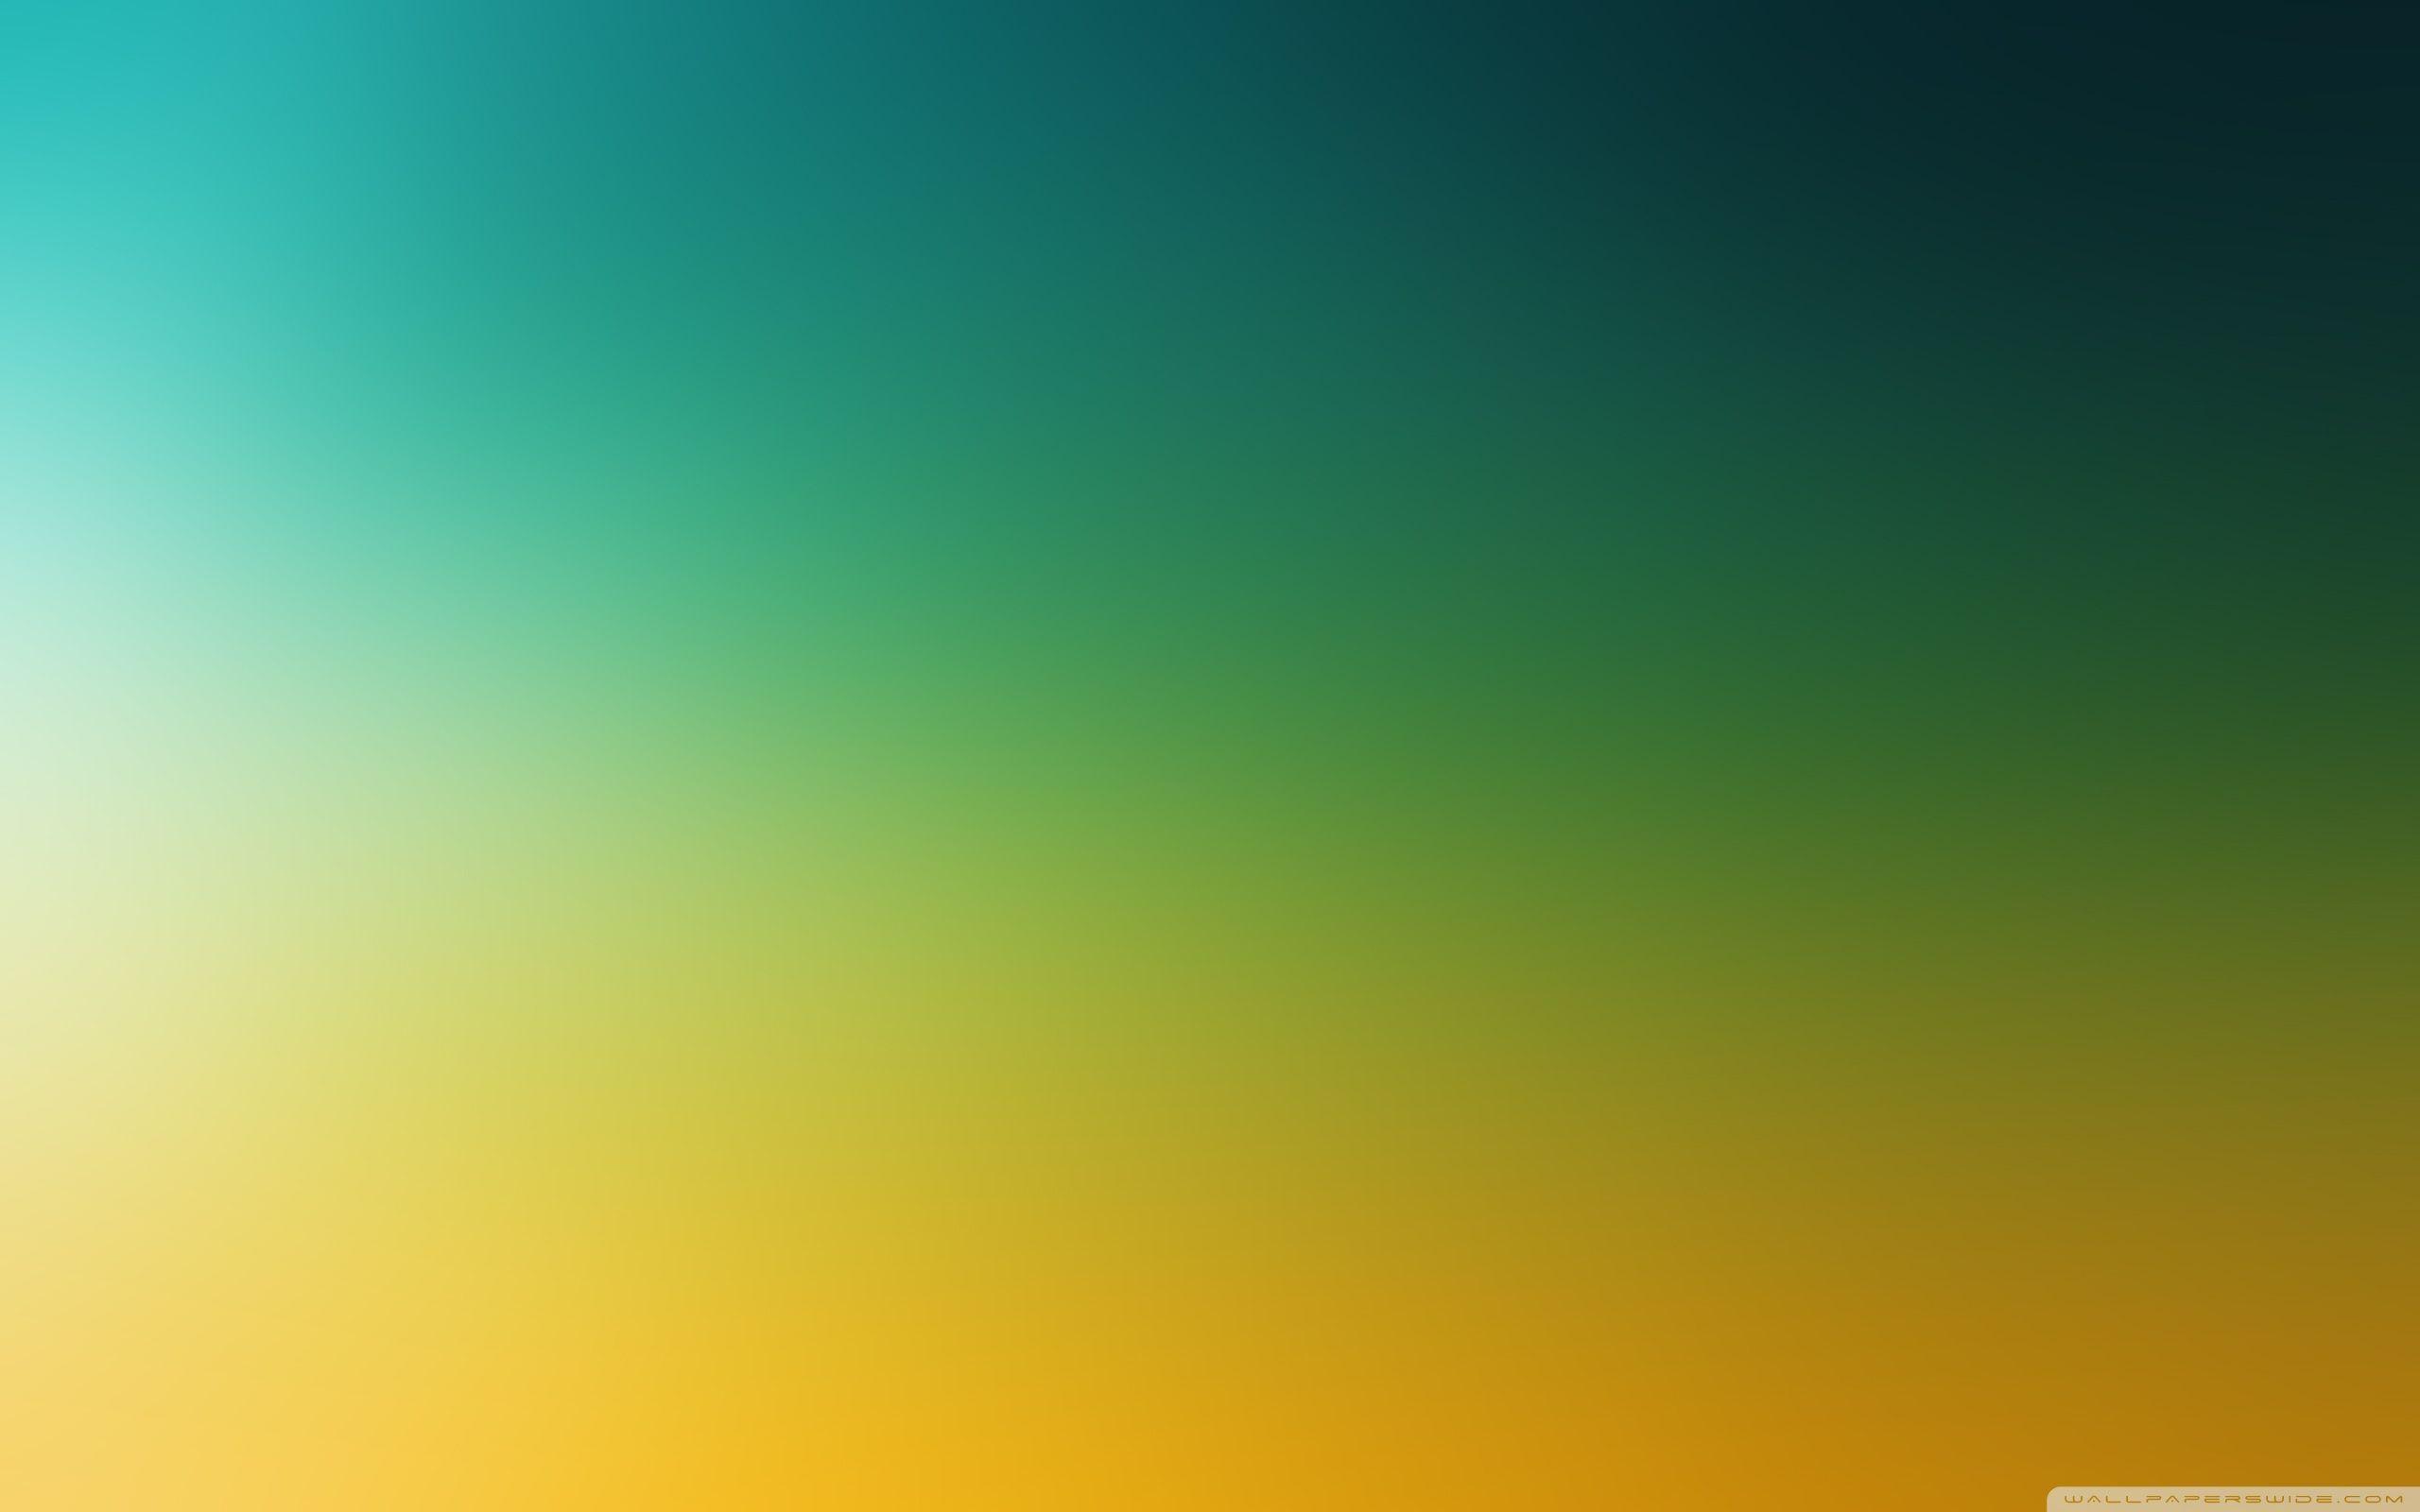 Wallpaper Yellow and Green Light Color Background  Download Free Image